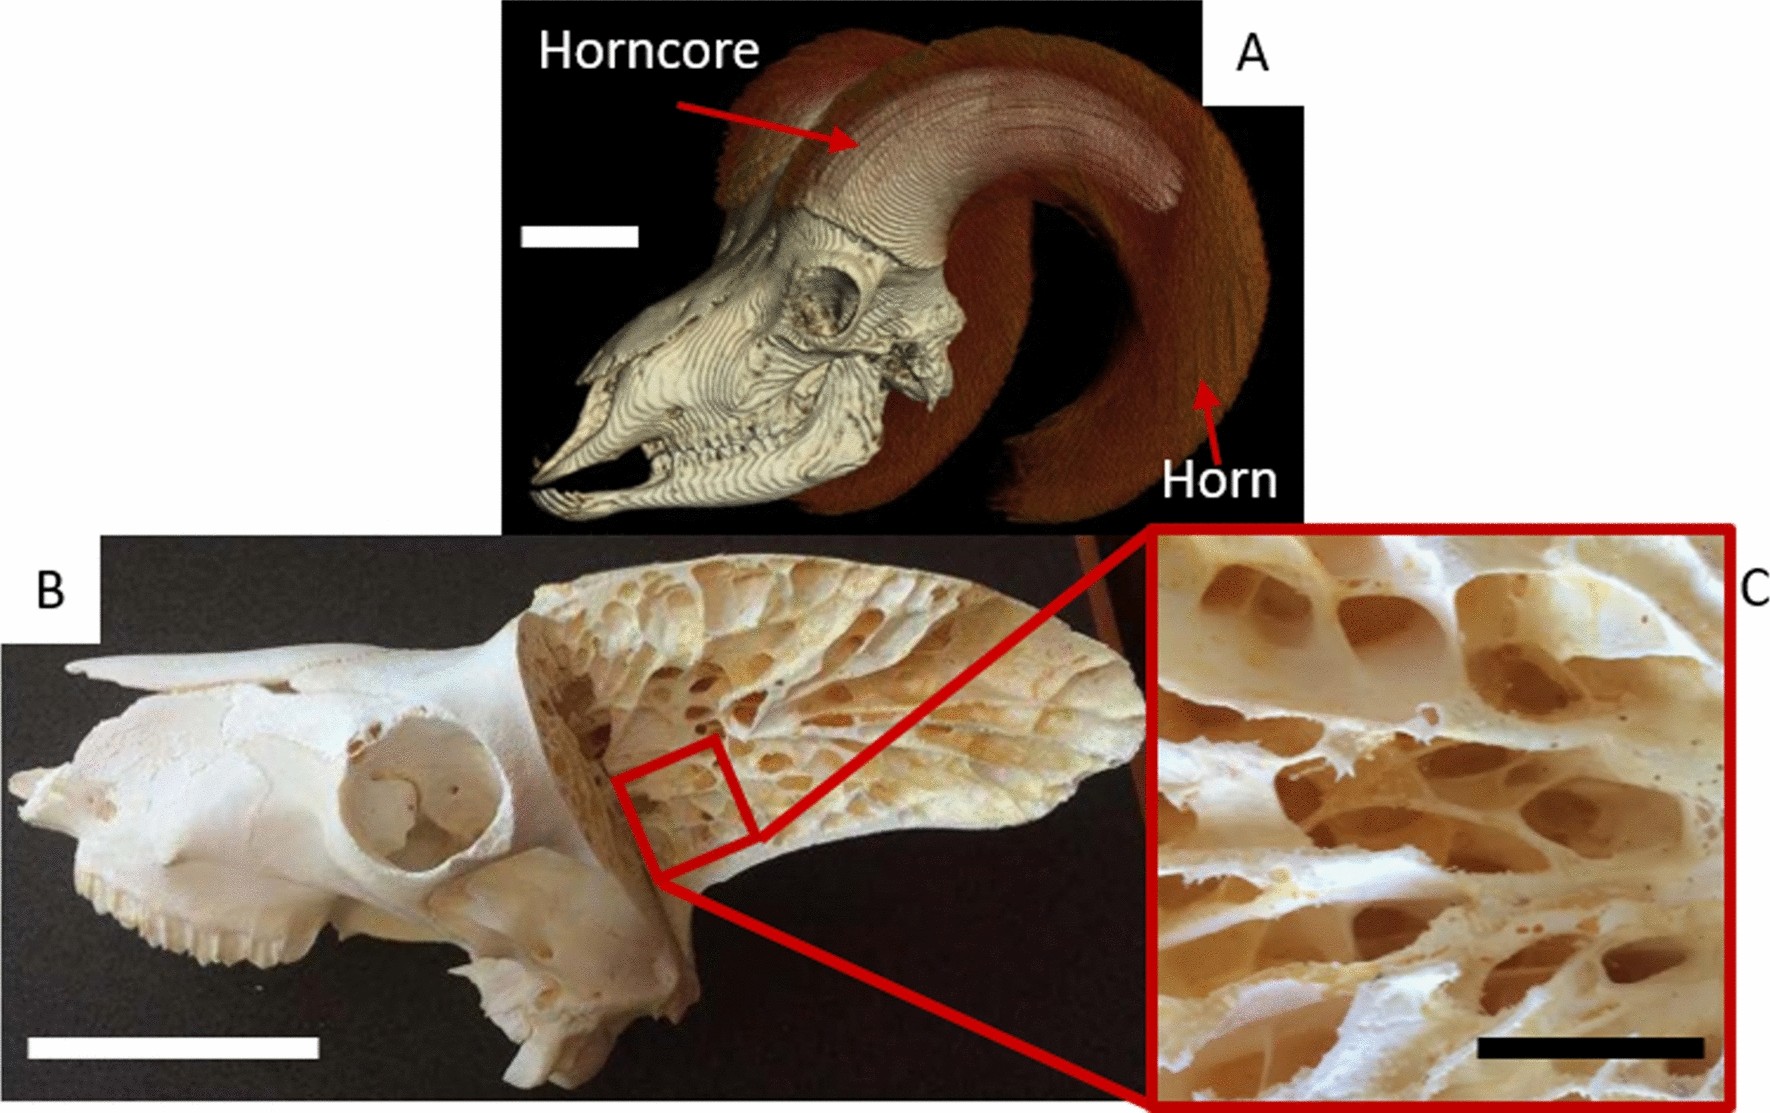 Bioinspired material architectures from bighorn sheep horncore velar bone  for impact loading applications | Scientific Reports